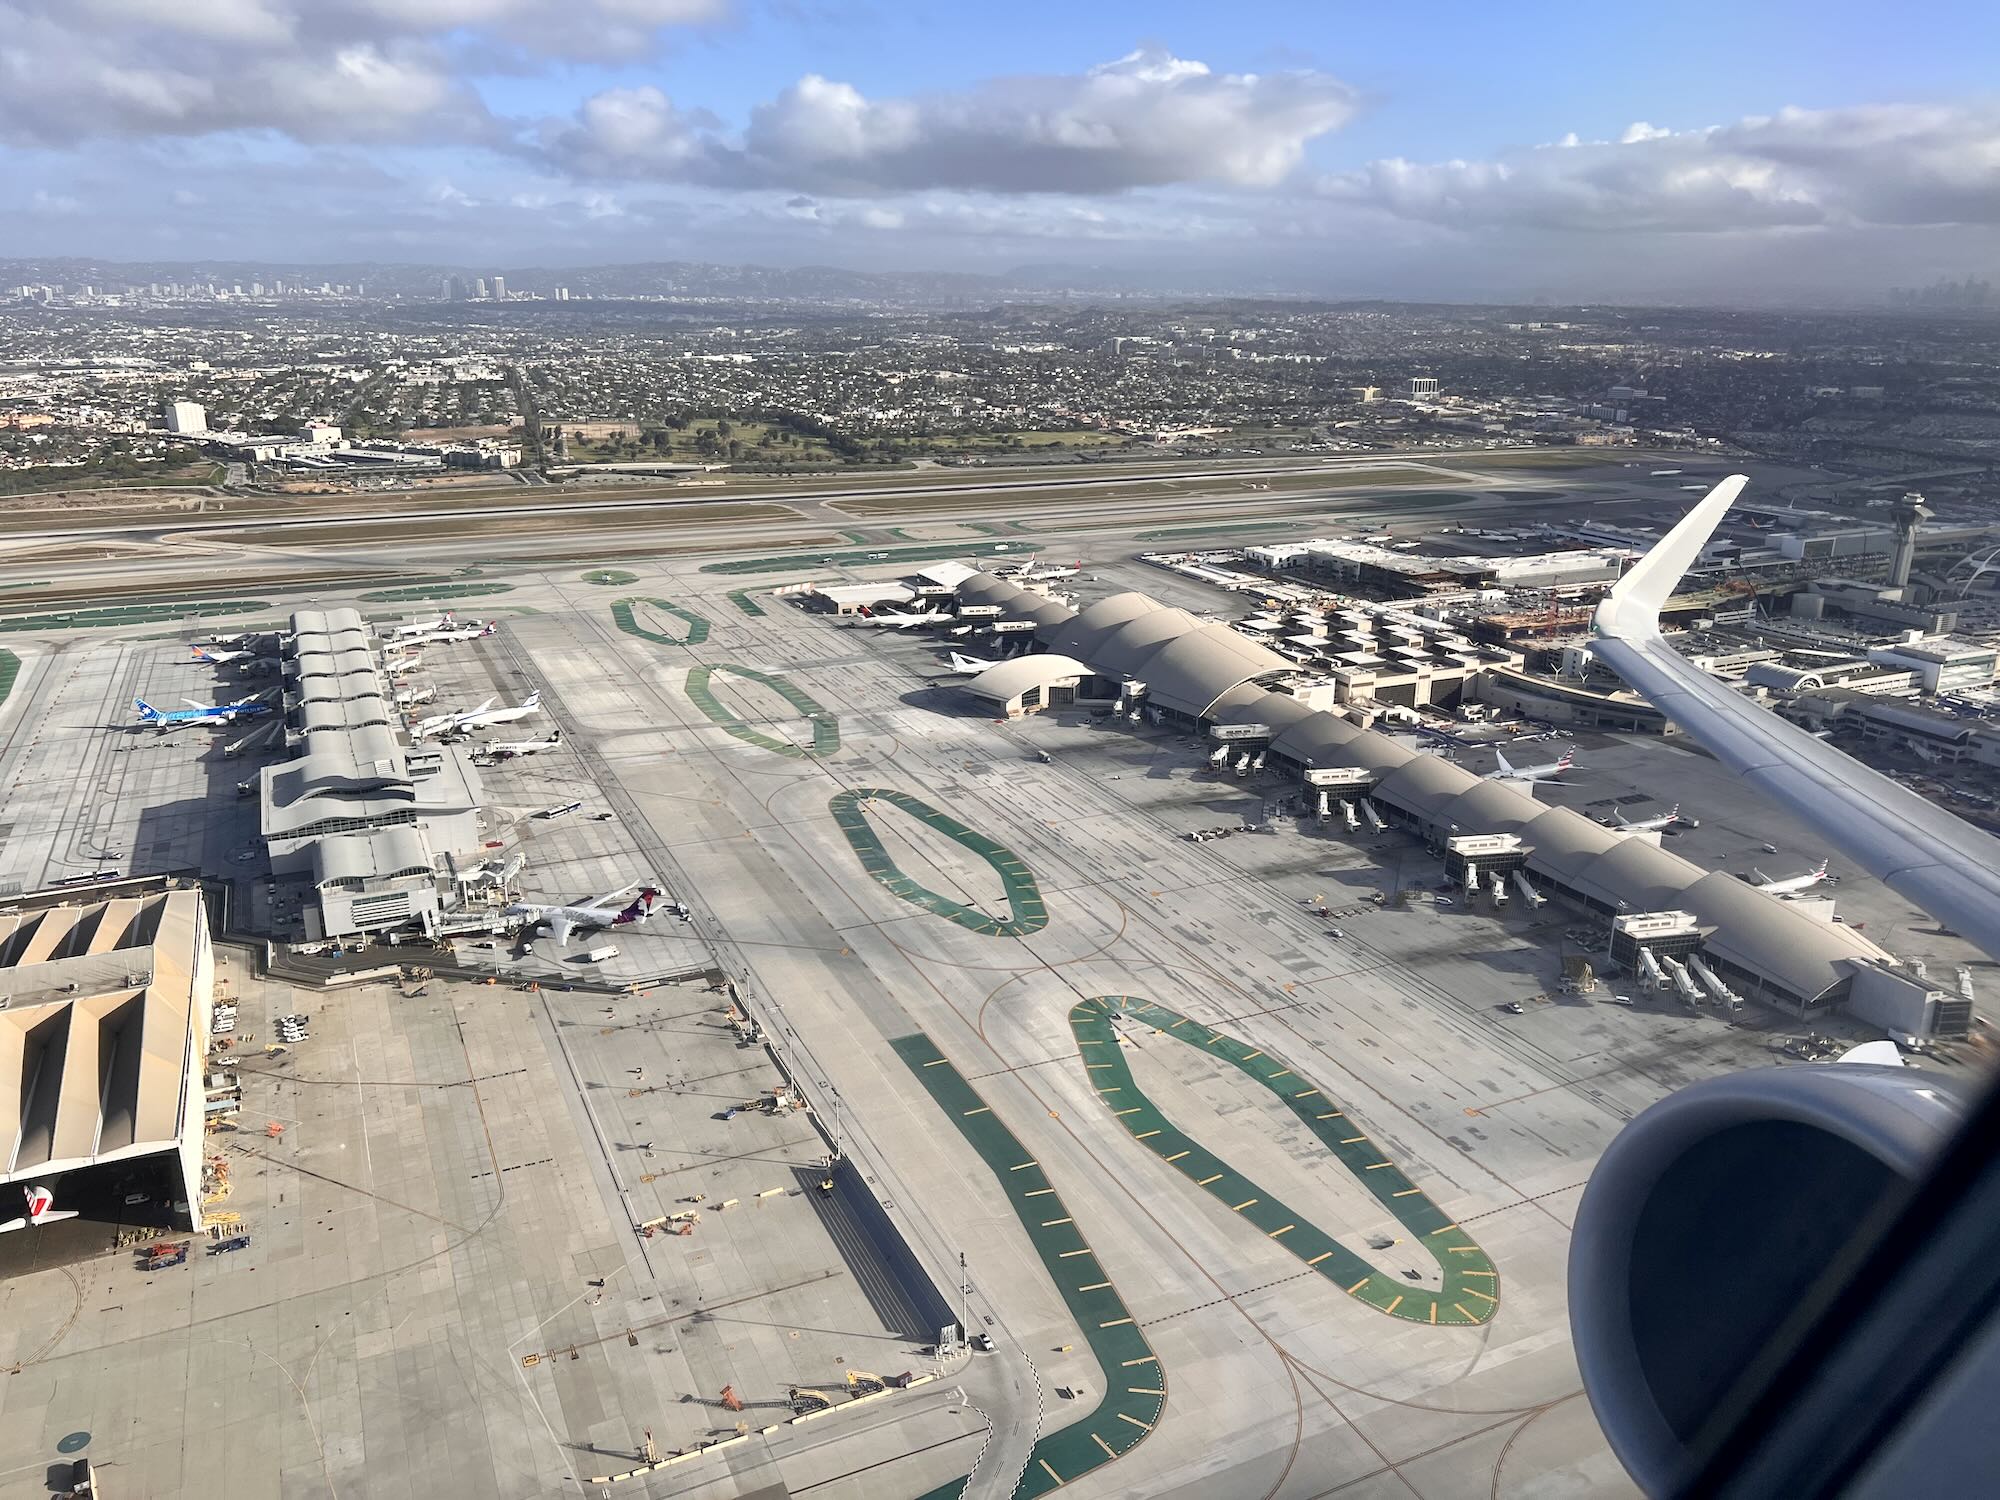 Lax Airport departing